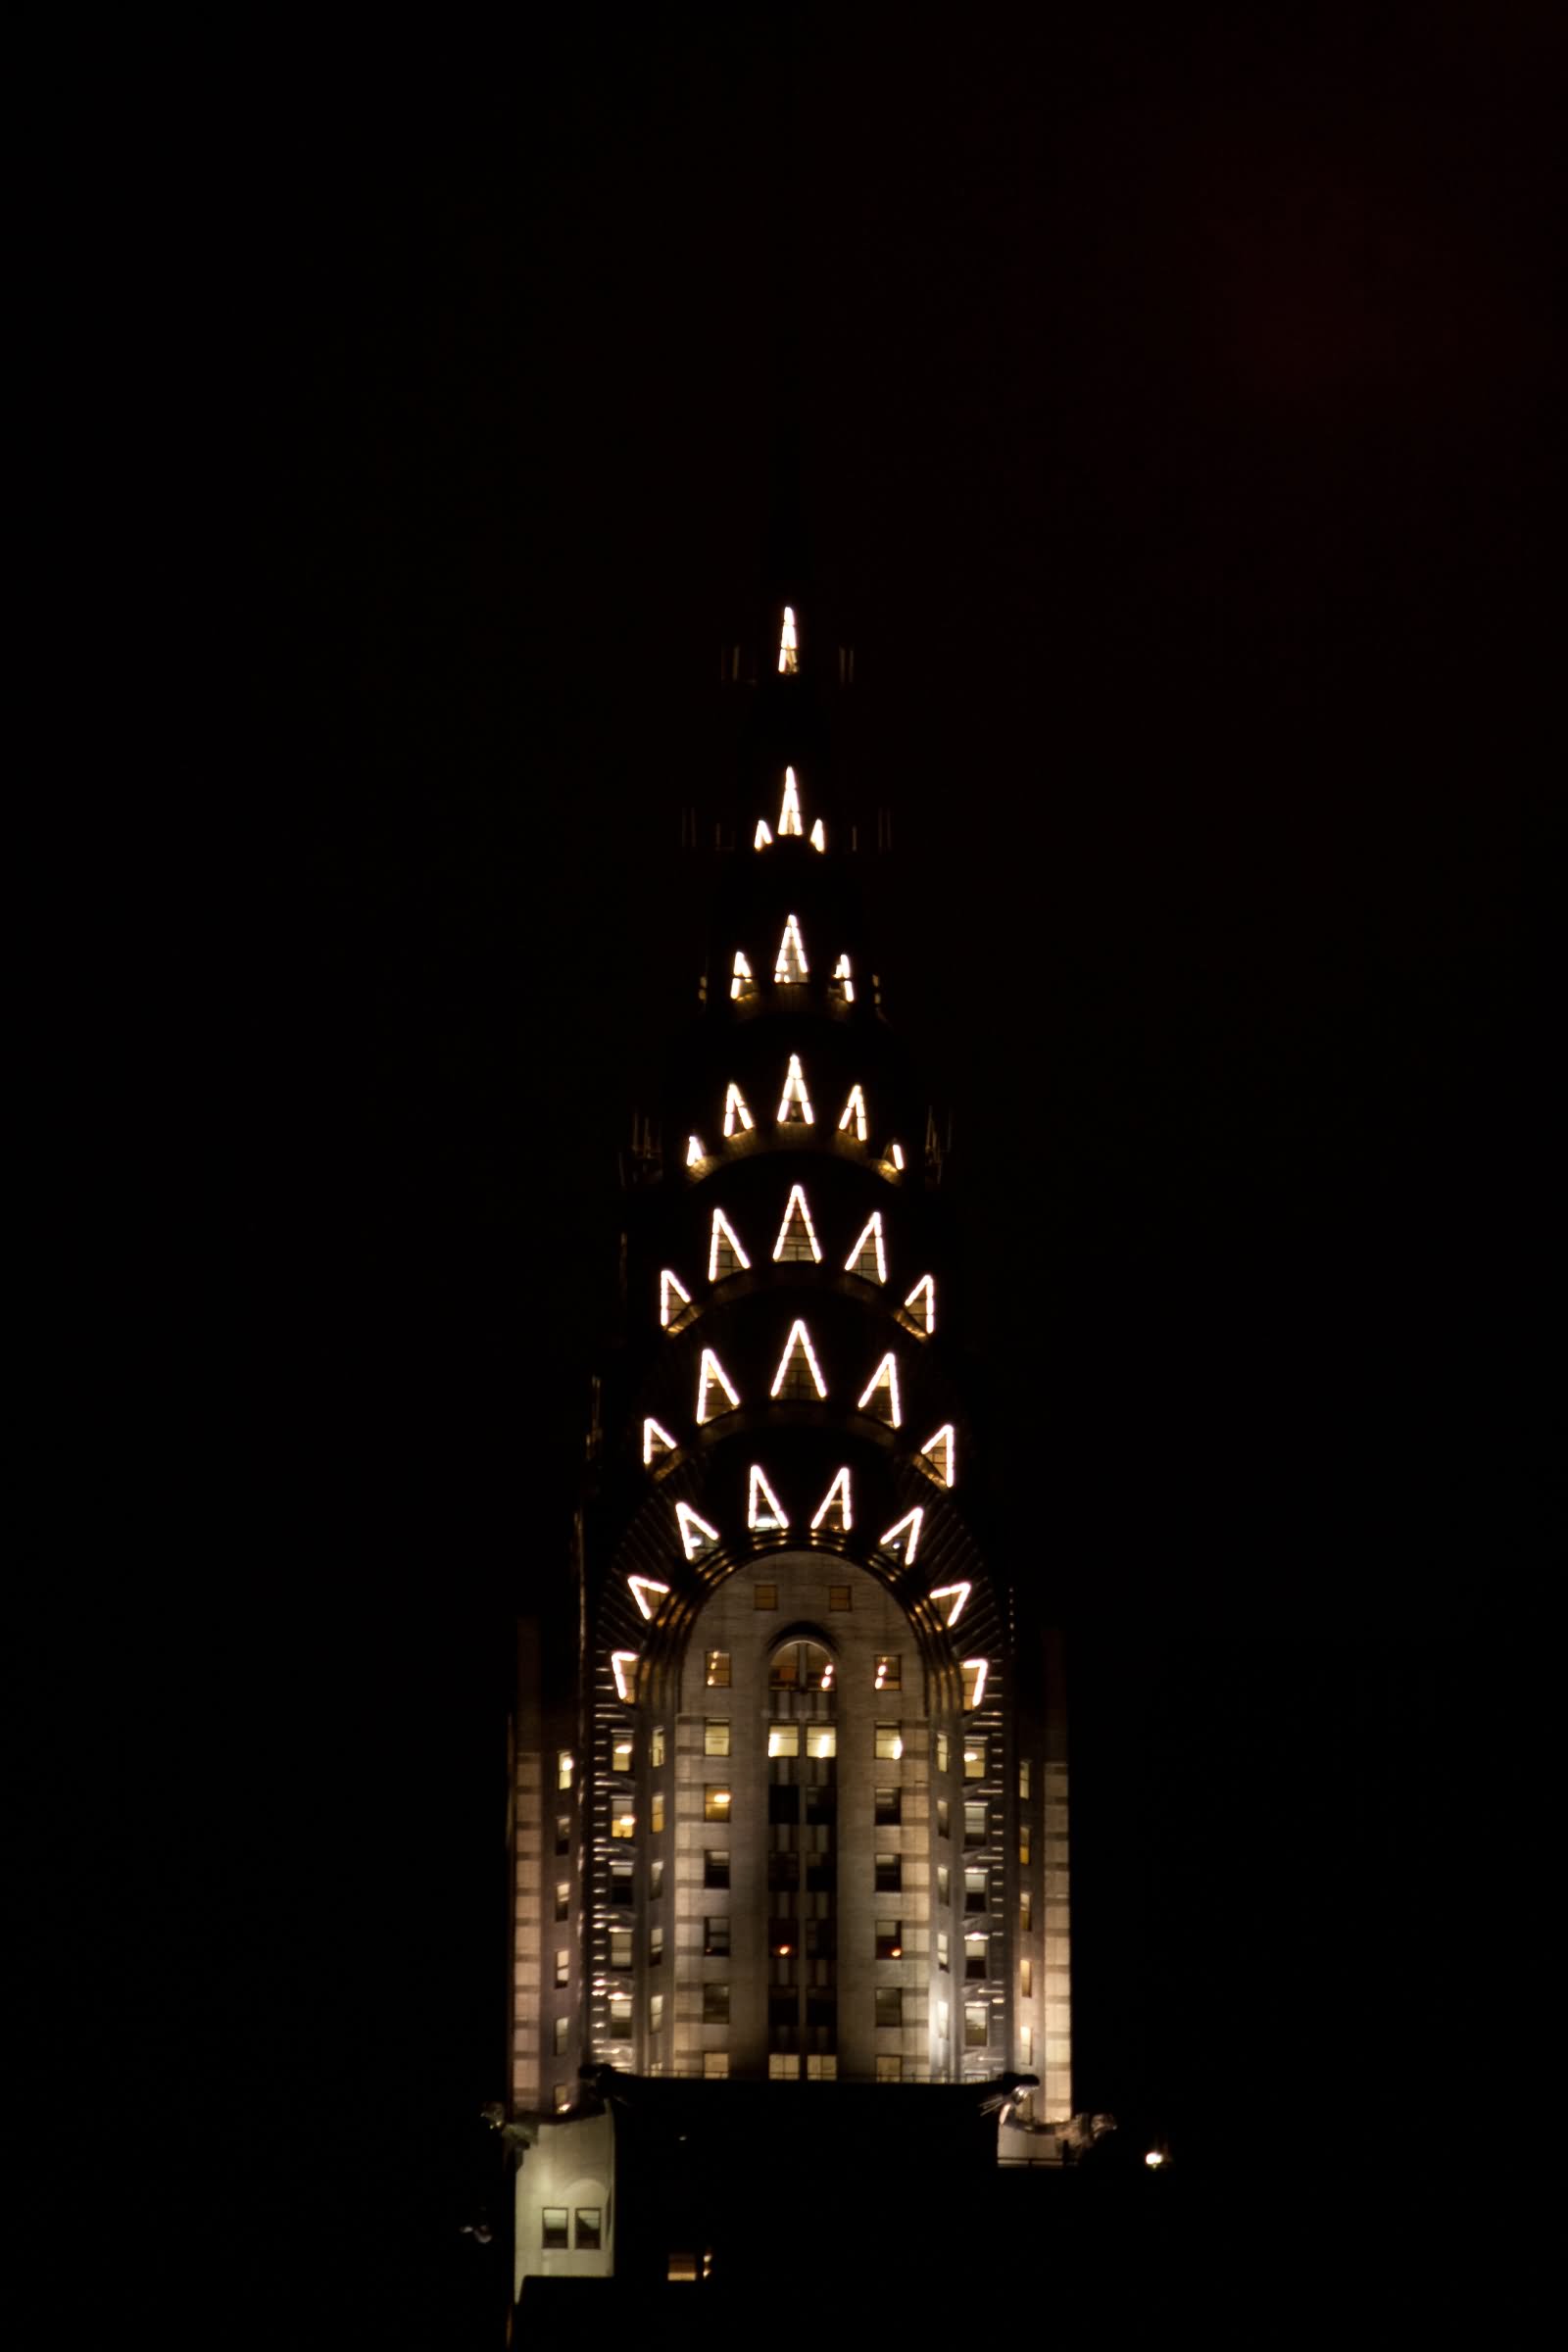 Chrysler Building Lit It Up At Night